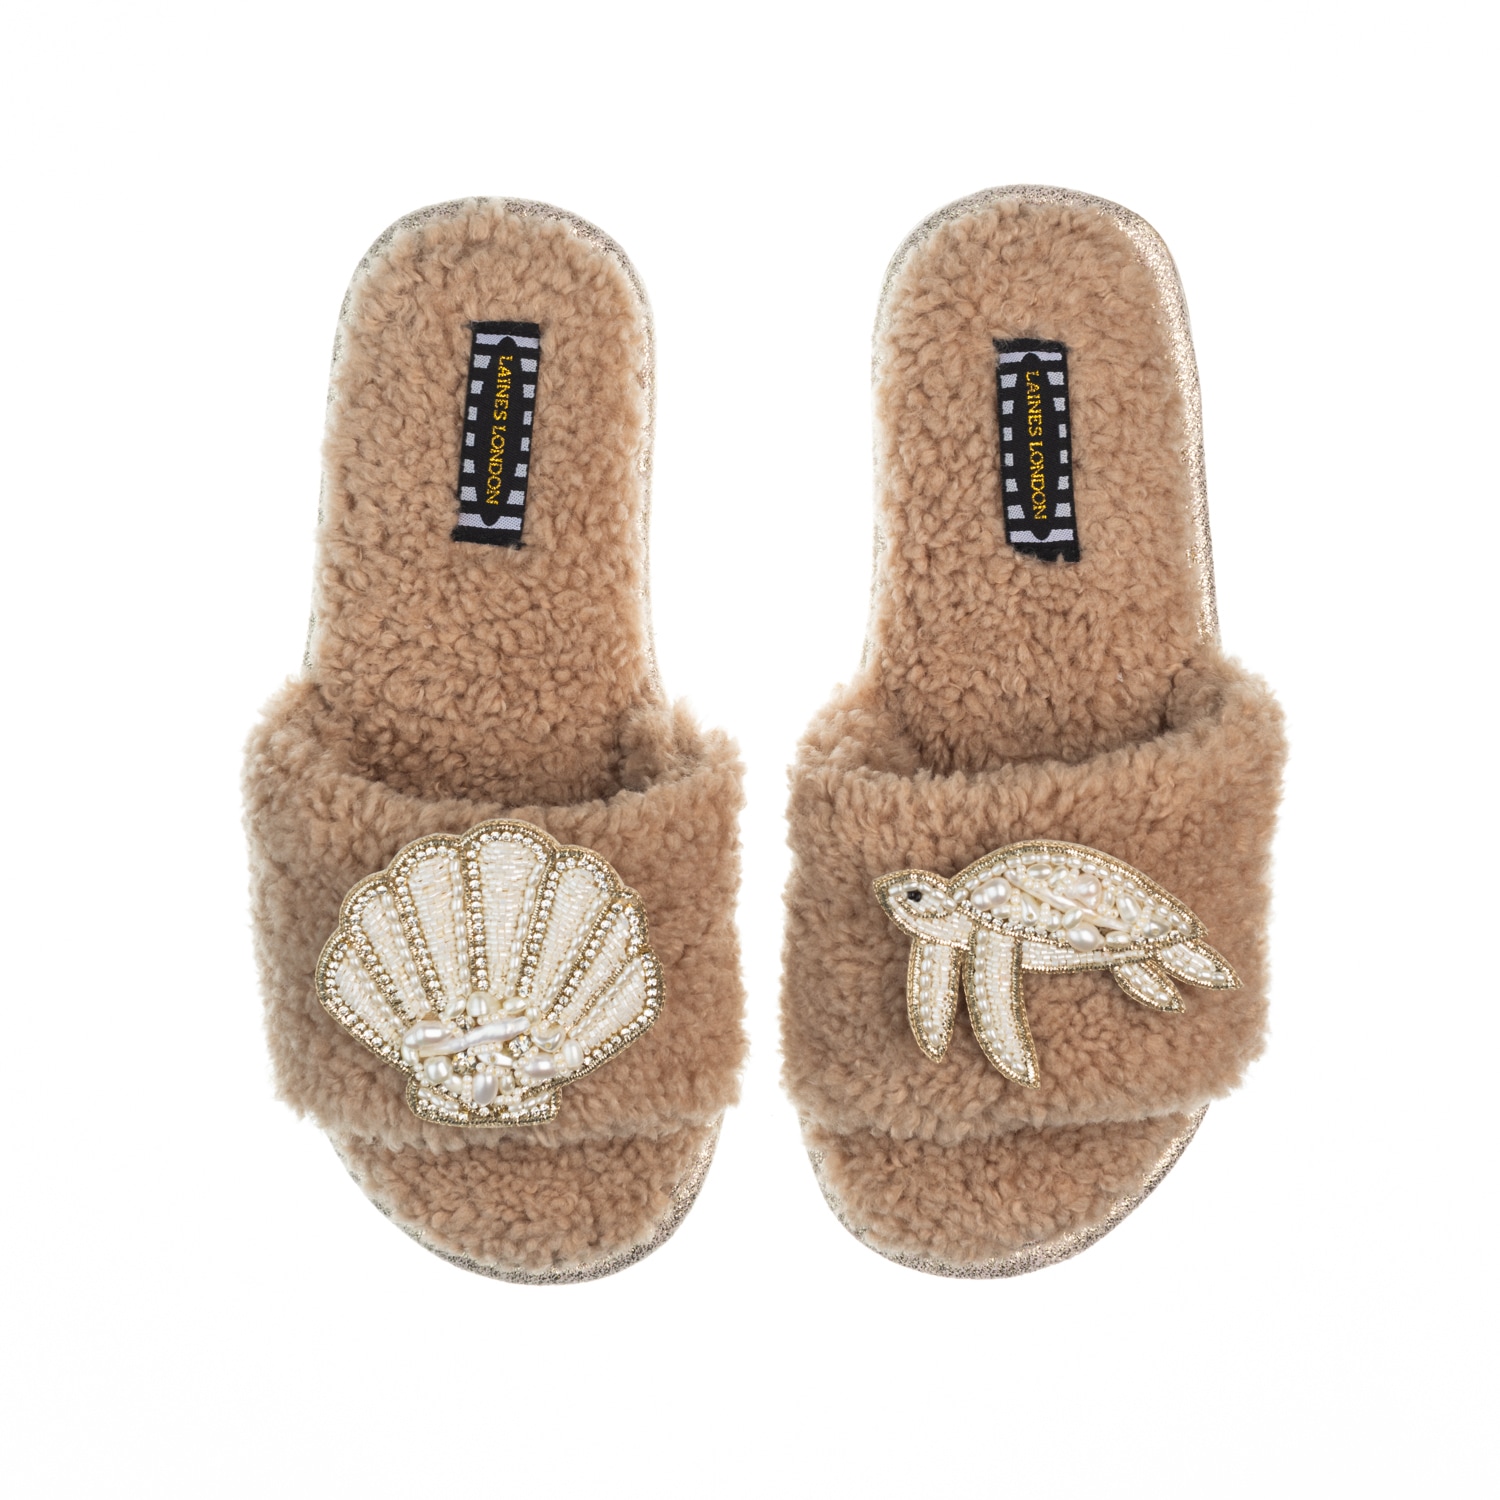 Laines London Women's Brown Teddy Toweling Slipper Sliders With Beaded Shell & Turtle Brooches - Toffee